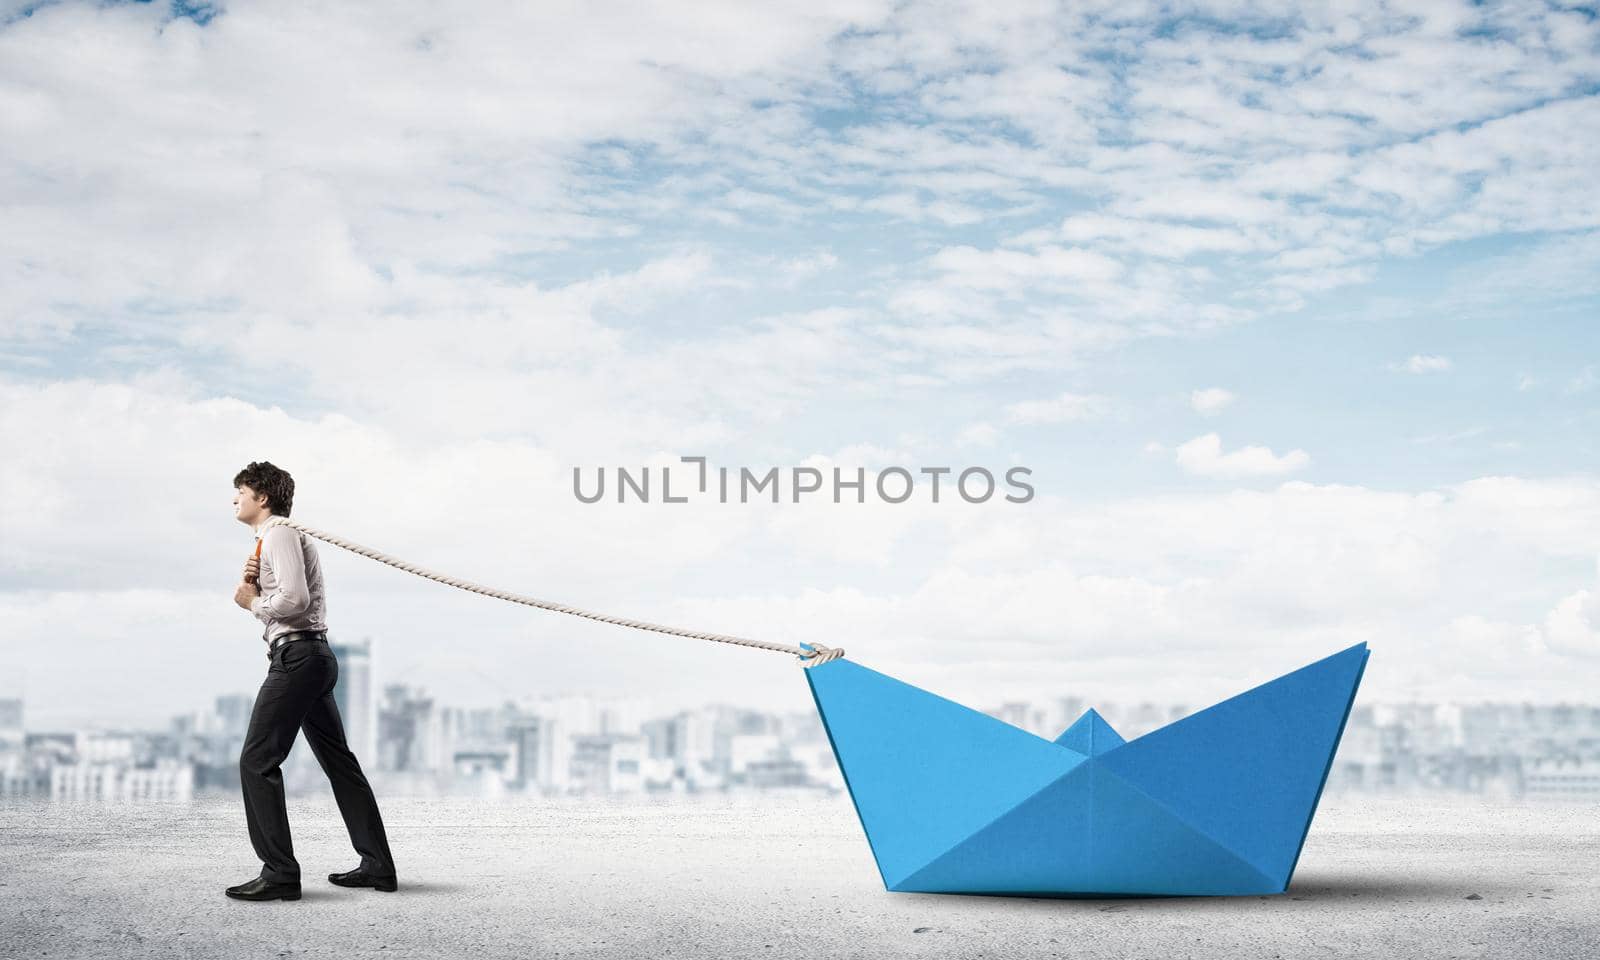 Successful businessman pulling with rope paper boat